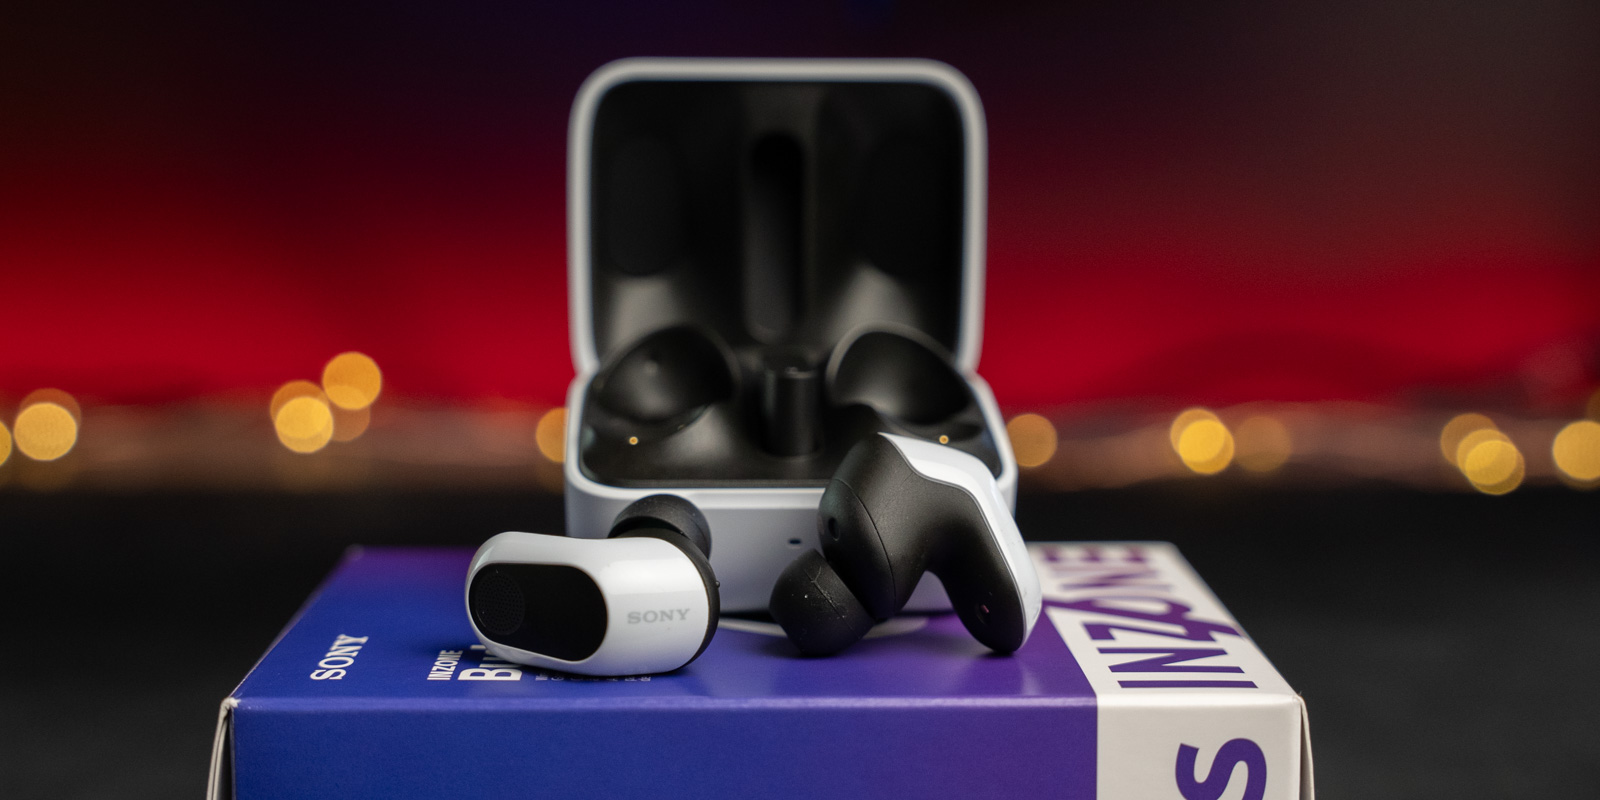 Sony's $200 Pulse Explore earbuds will be available on December 6